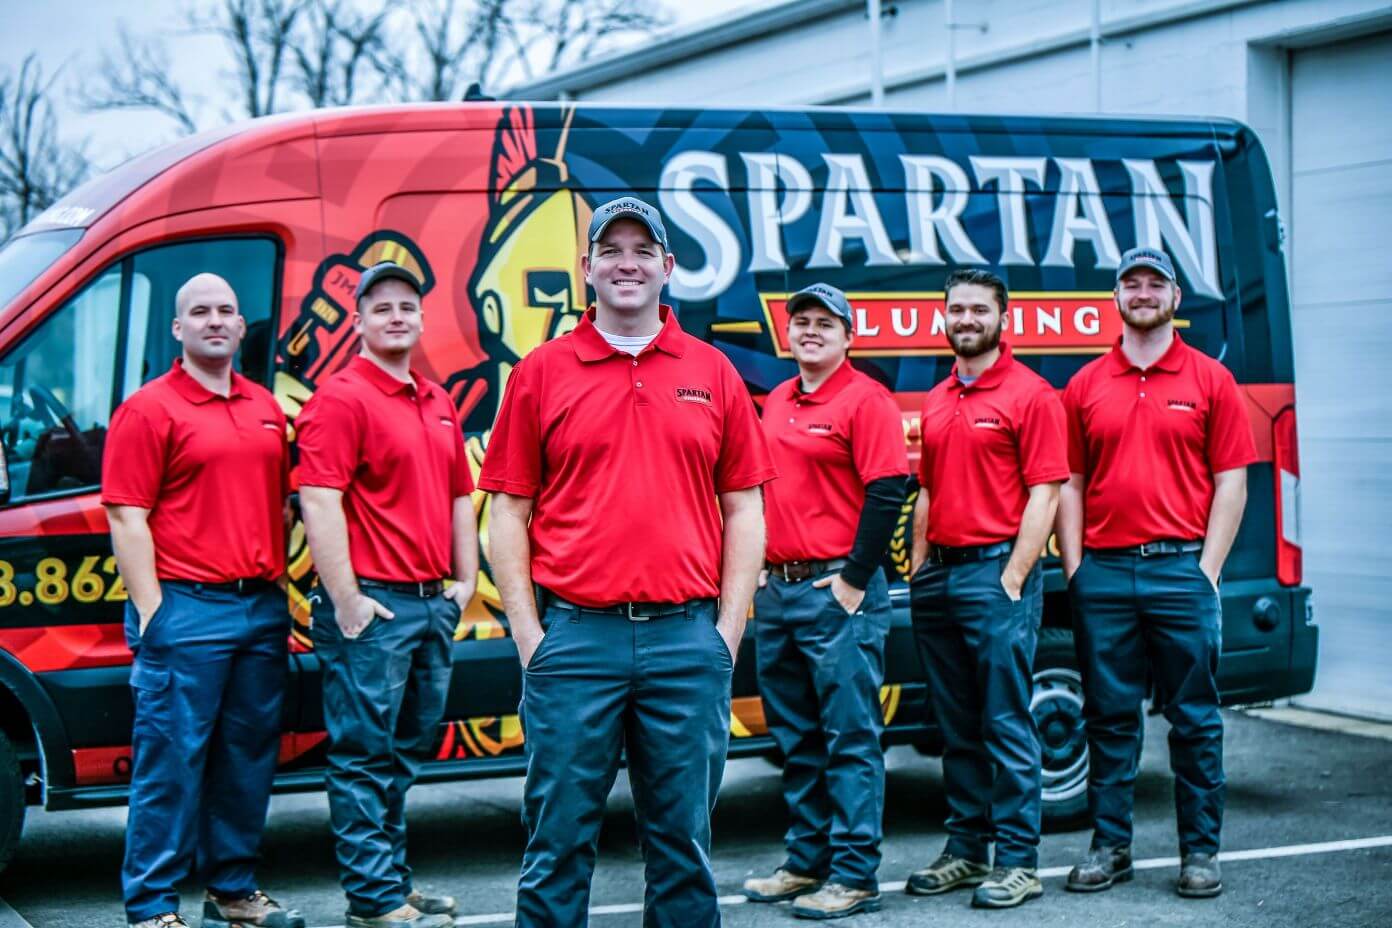 Plumbing Services in Miamisburg, OH